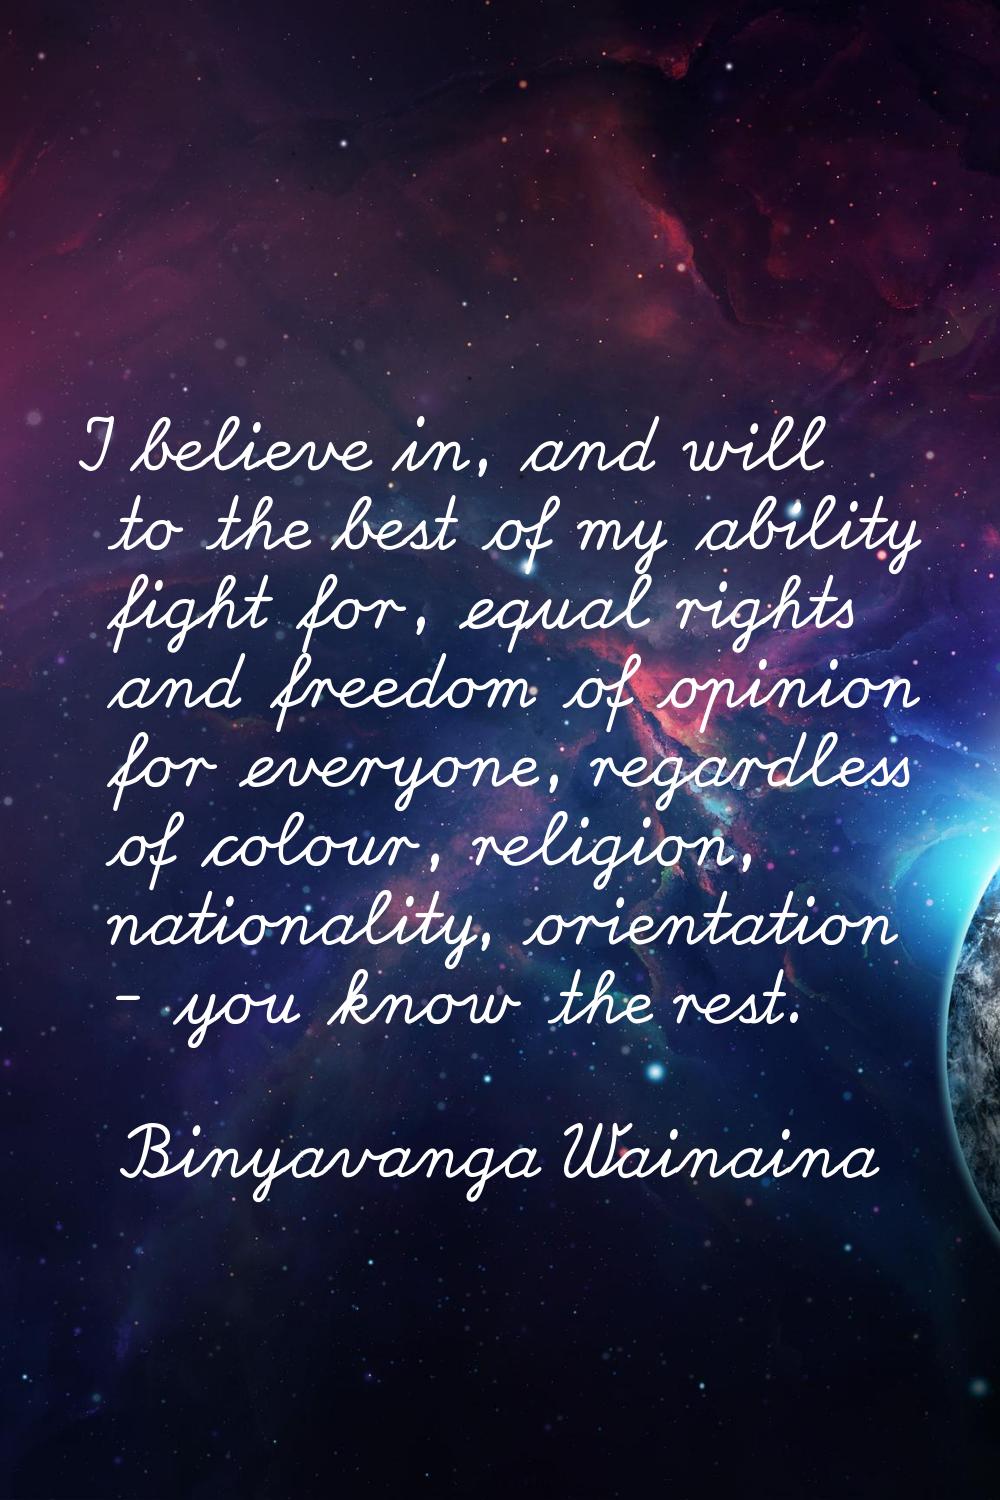 I believe in, and will to the best of my ability fight for, equal rights and freedom of opinion for